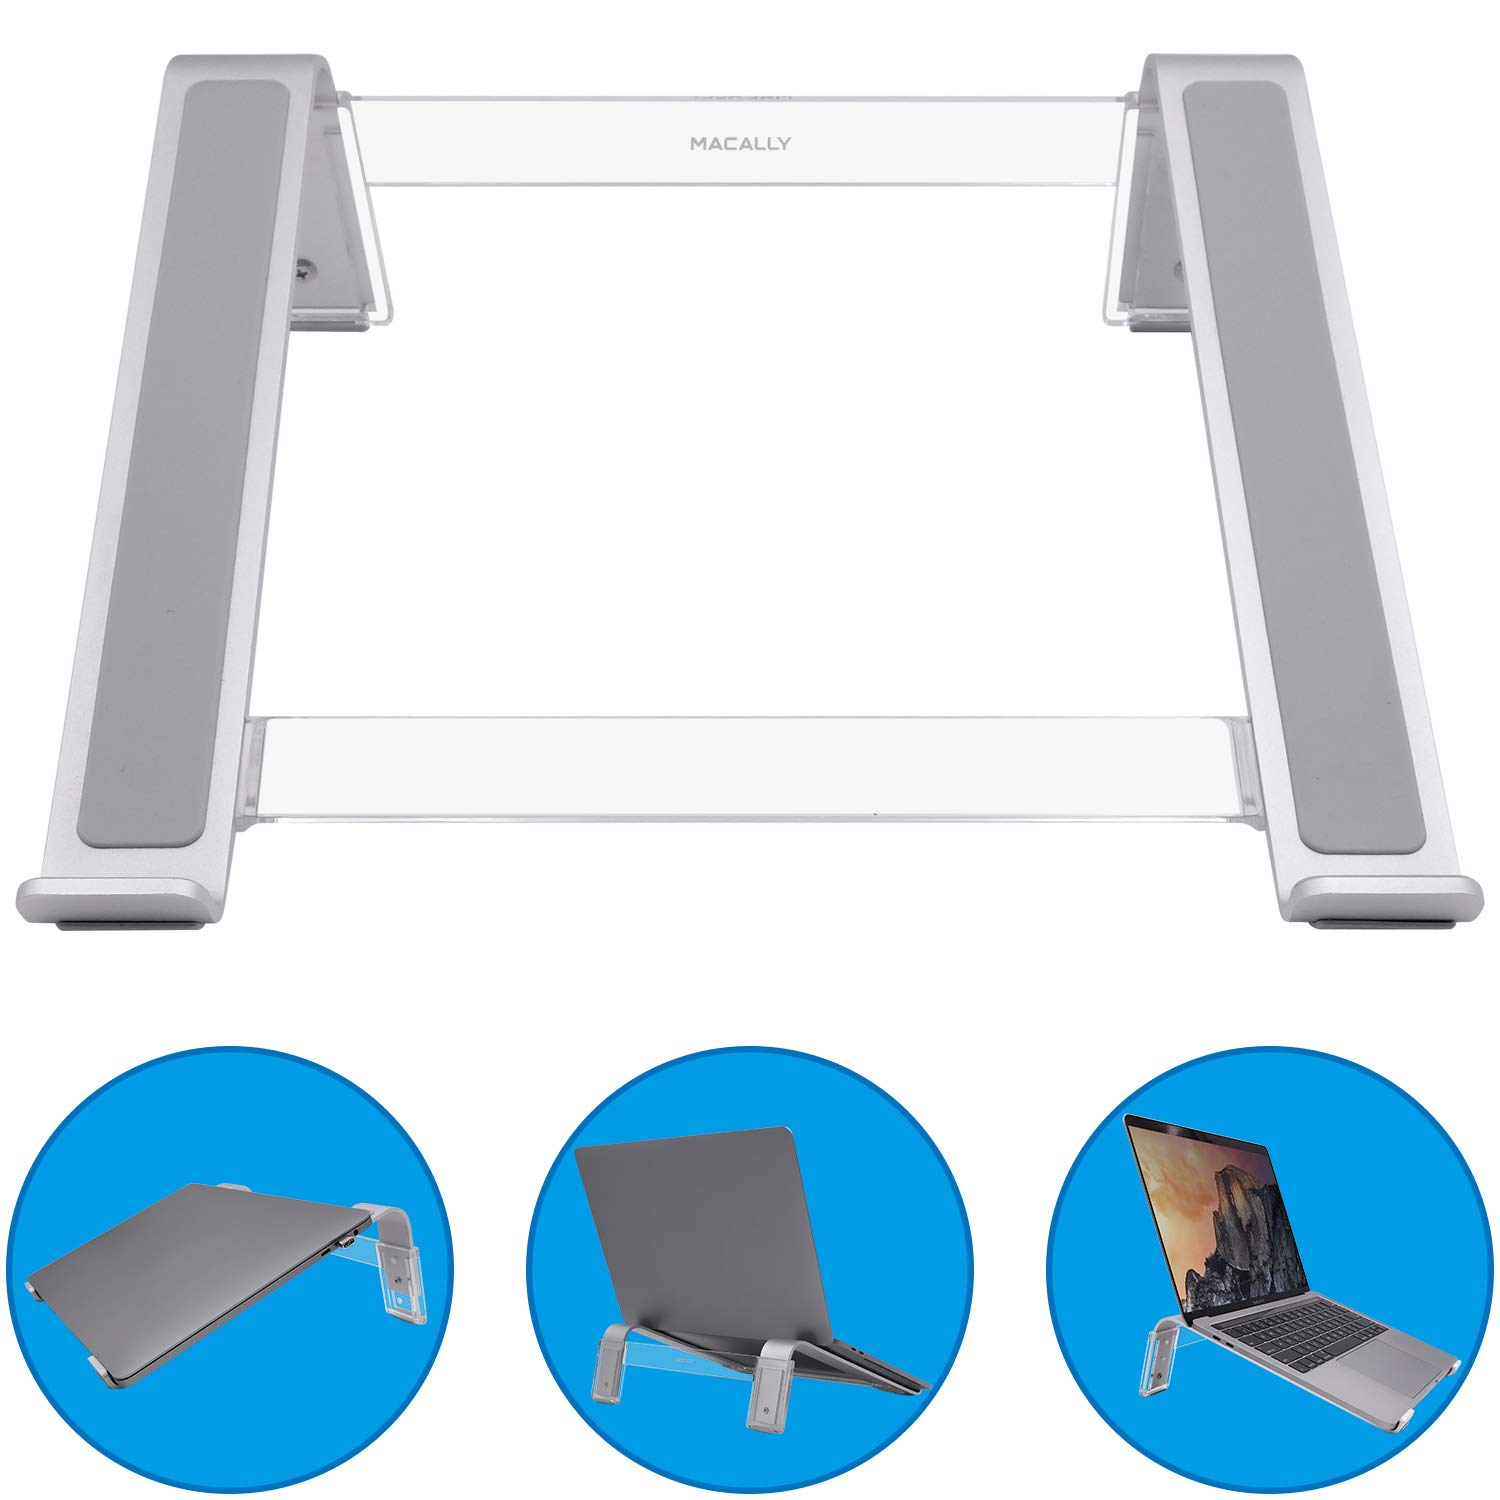 Macally Adjustable Laptop Stand for Desk - Ventilated Notebook Riser w/ 3 Angle Adjustments for Apple MacBook Pro/Air, Samsung Chromebook, Acer Switch, HP Pavillion, Dell XPS, Up to 17.3"- Aluminum